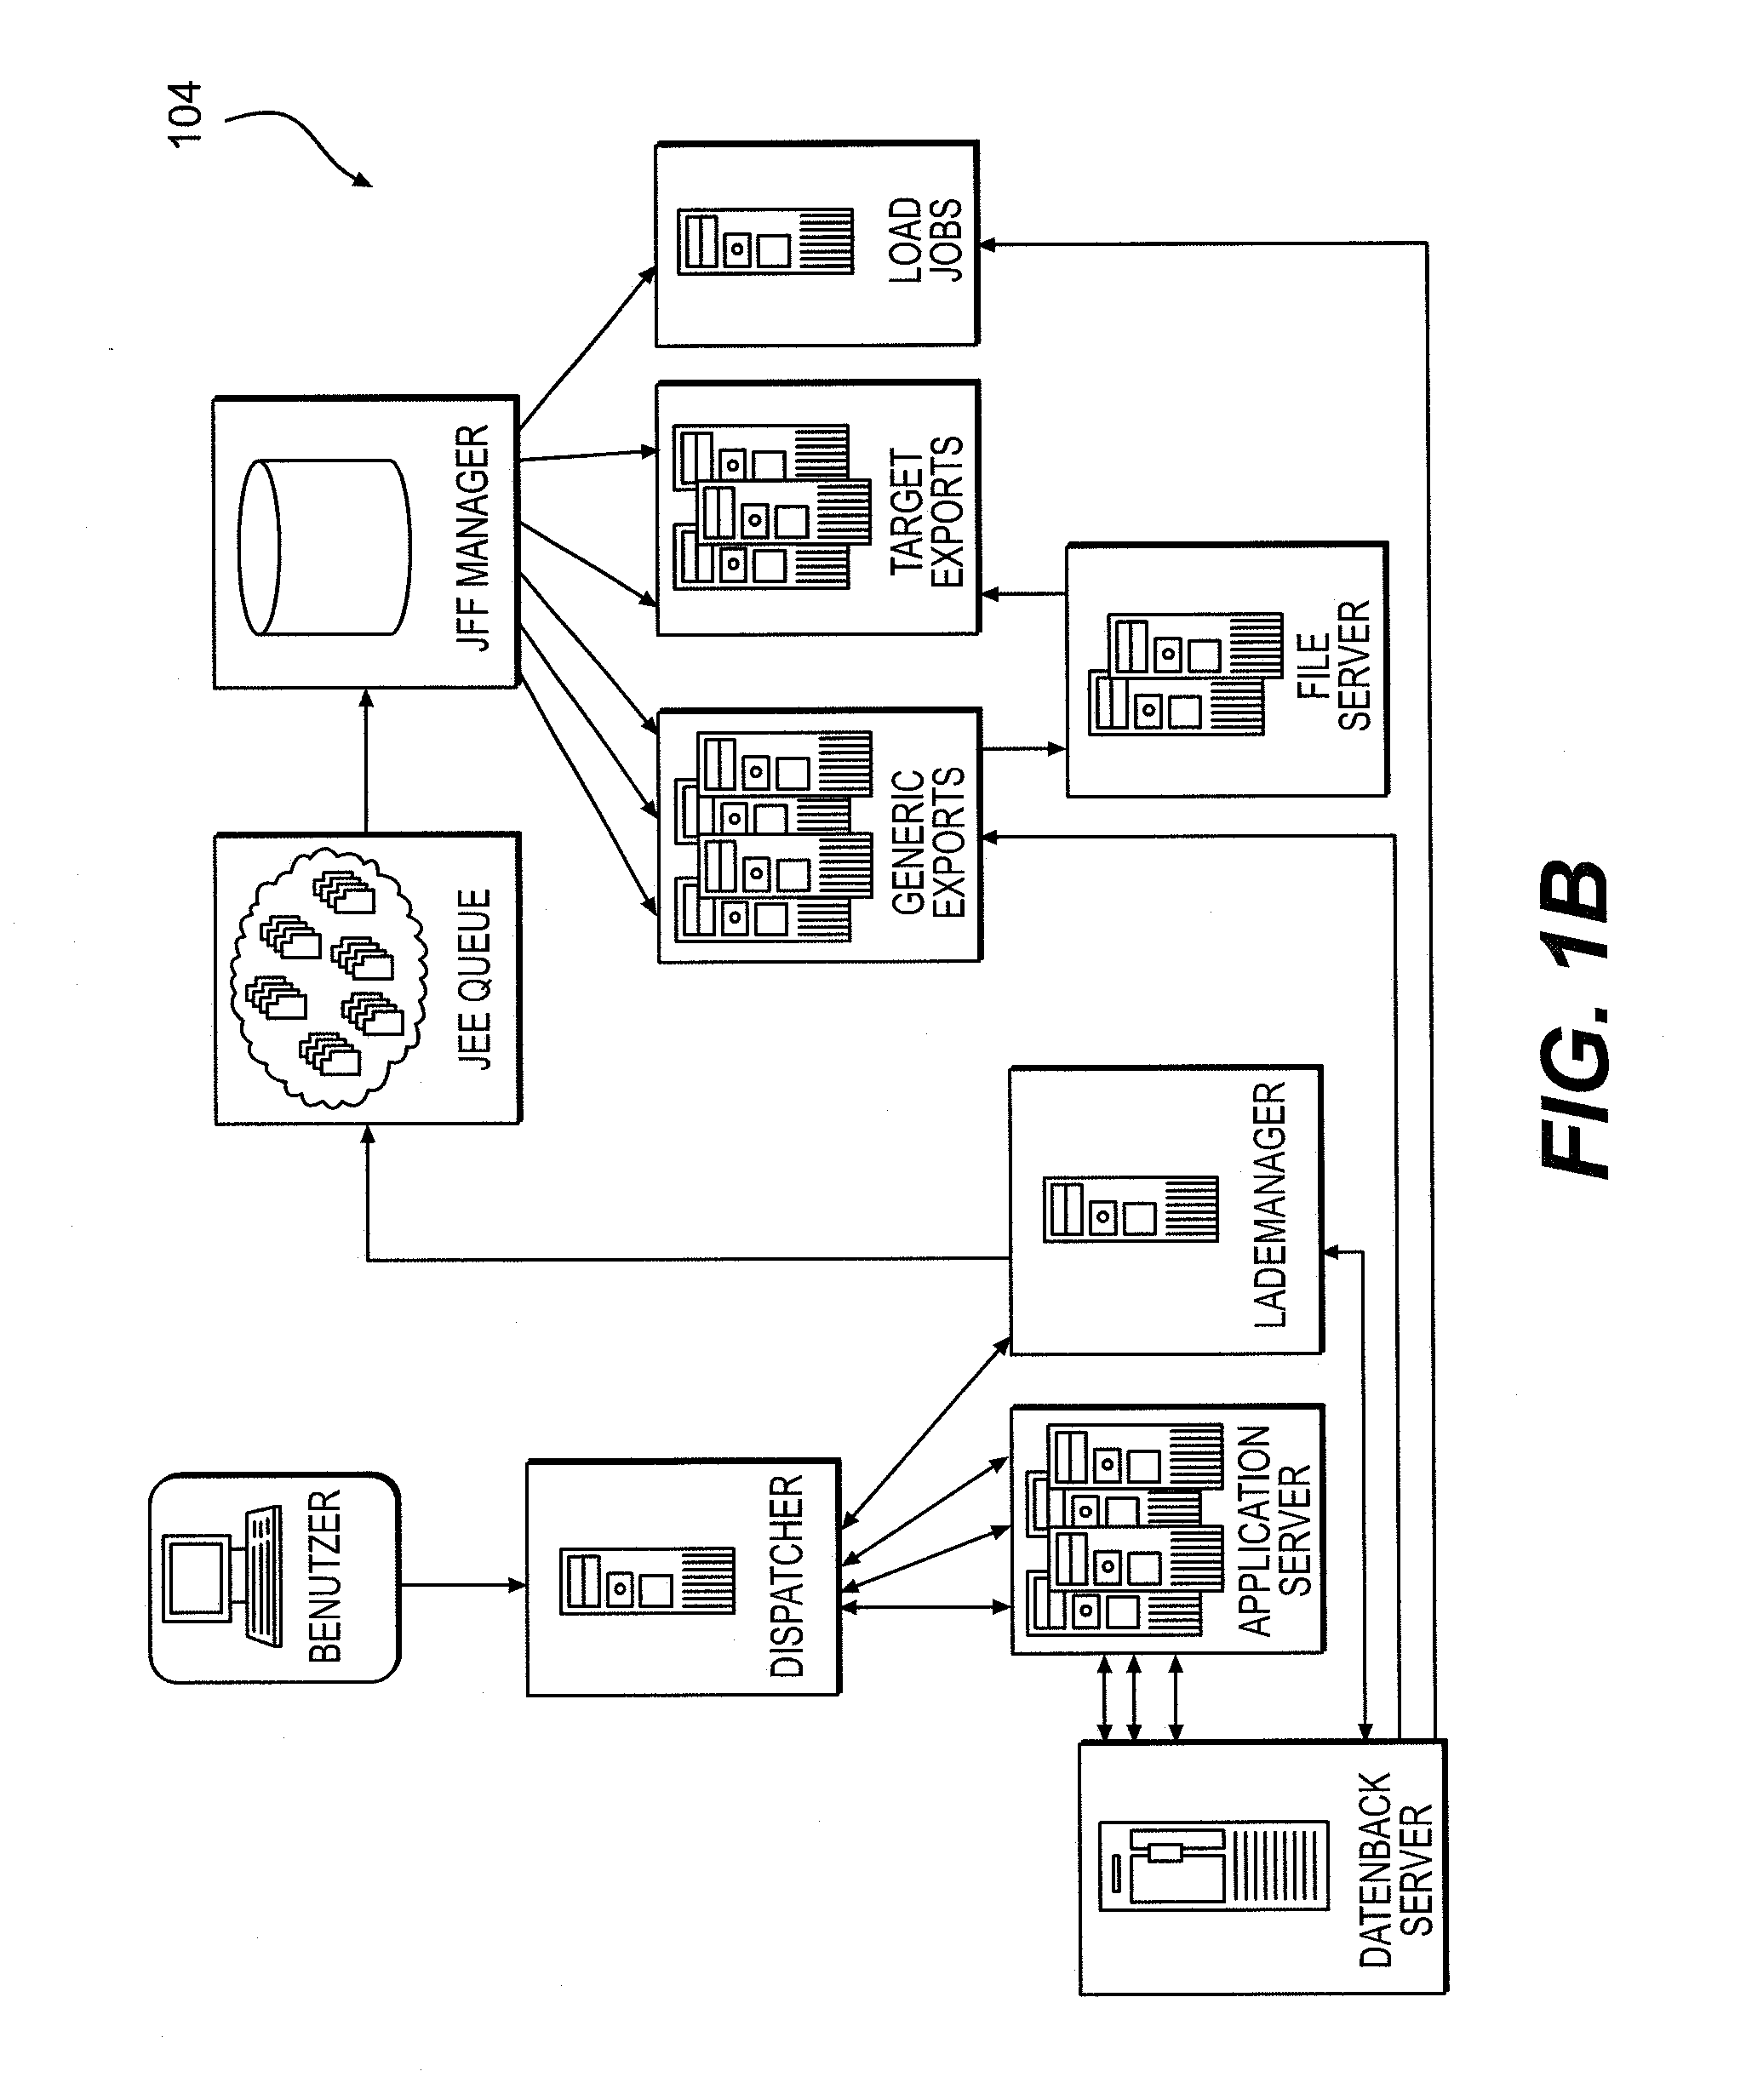 System and method to enable tracking of consumer behavior and activity